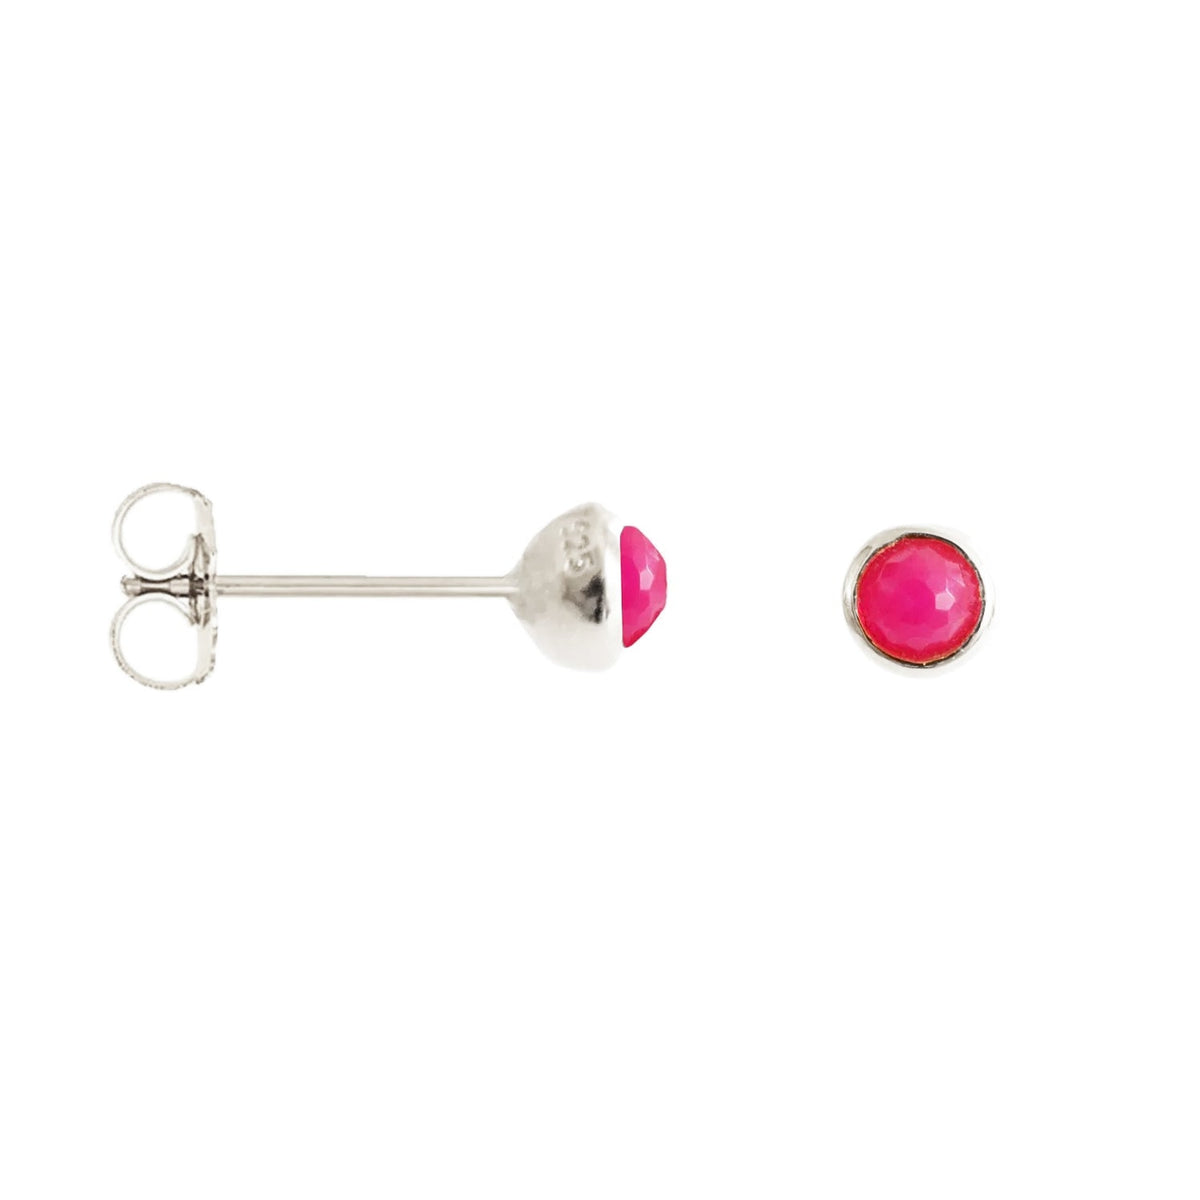 PRE-ORDER TINY PROTECT STUD EARRINGS - HOT PINK CHALCEDONY - SO PRETTY CARA COTTER